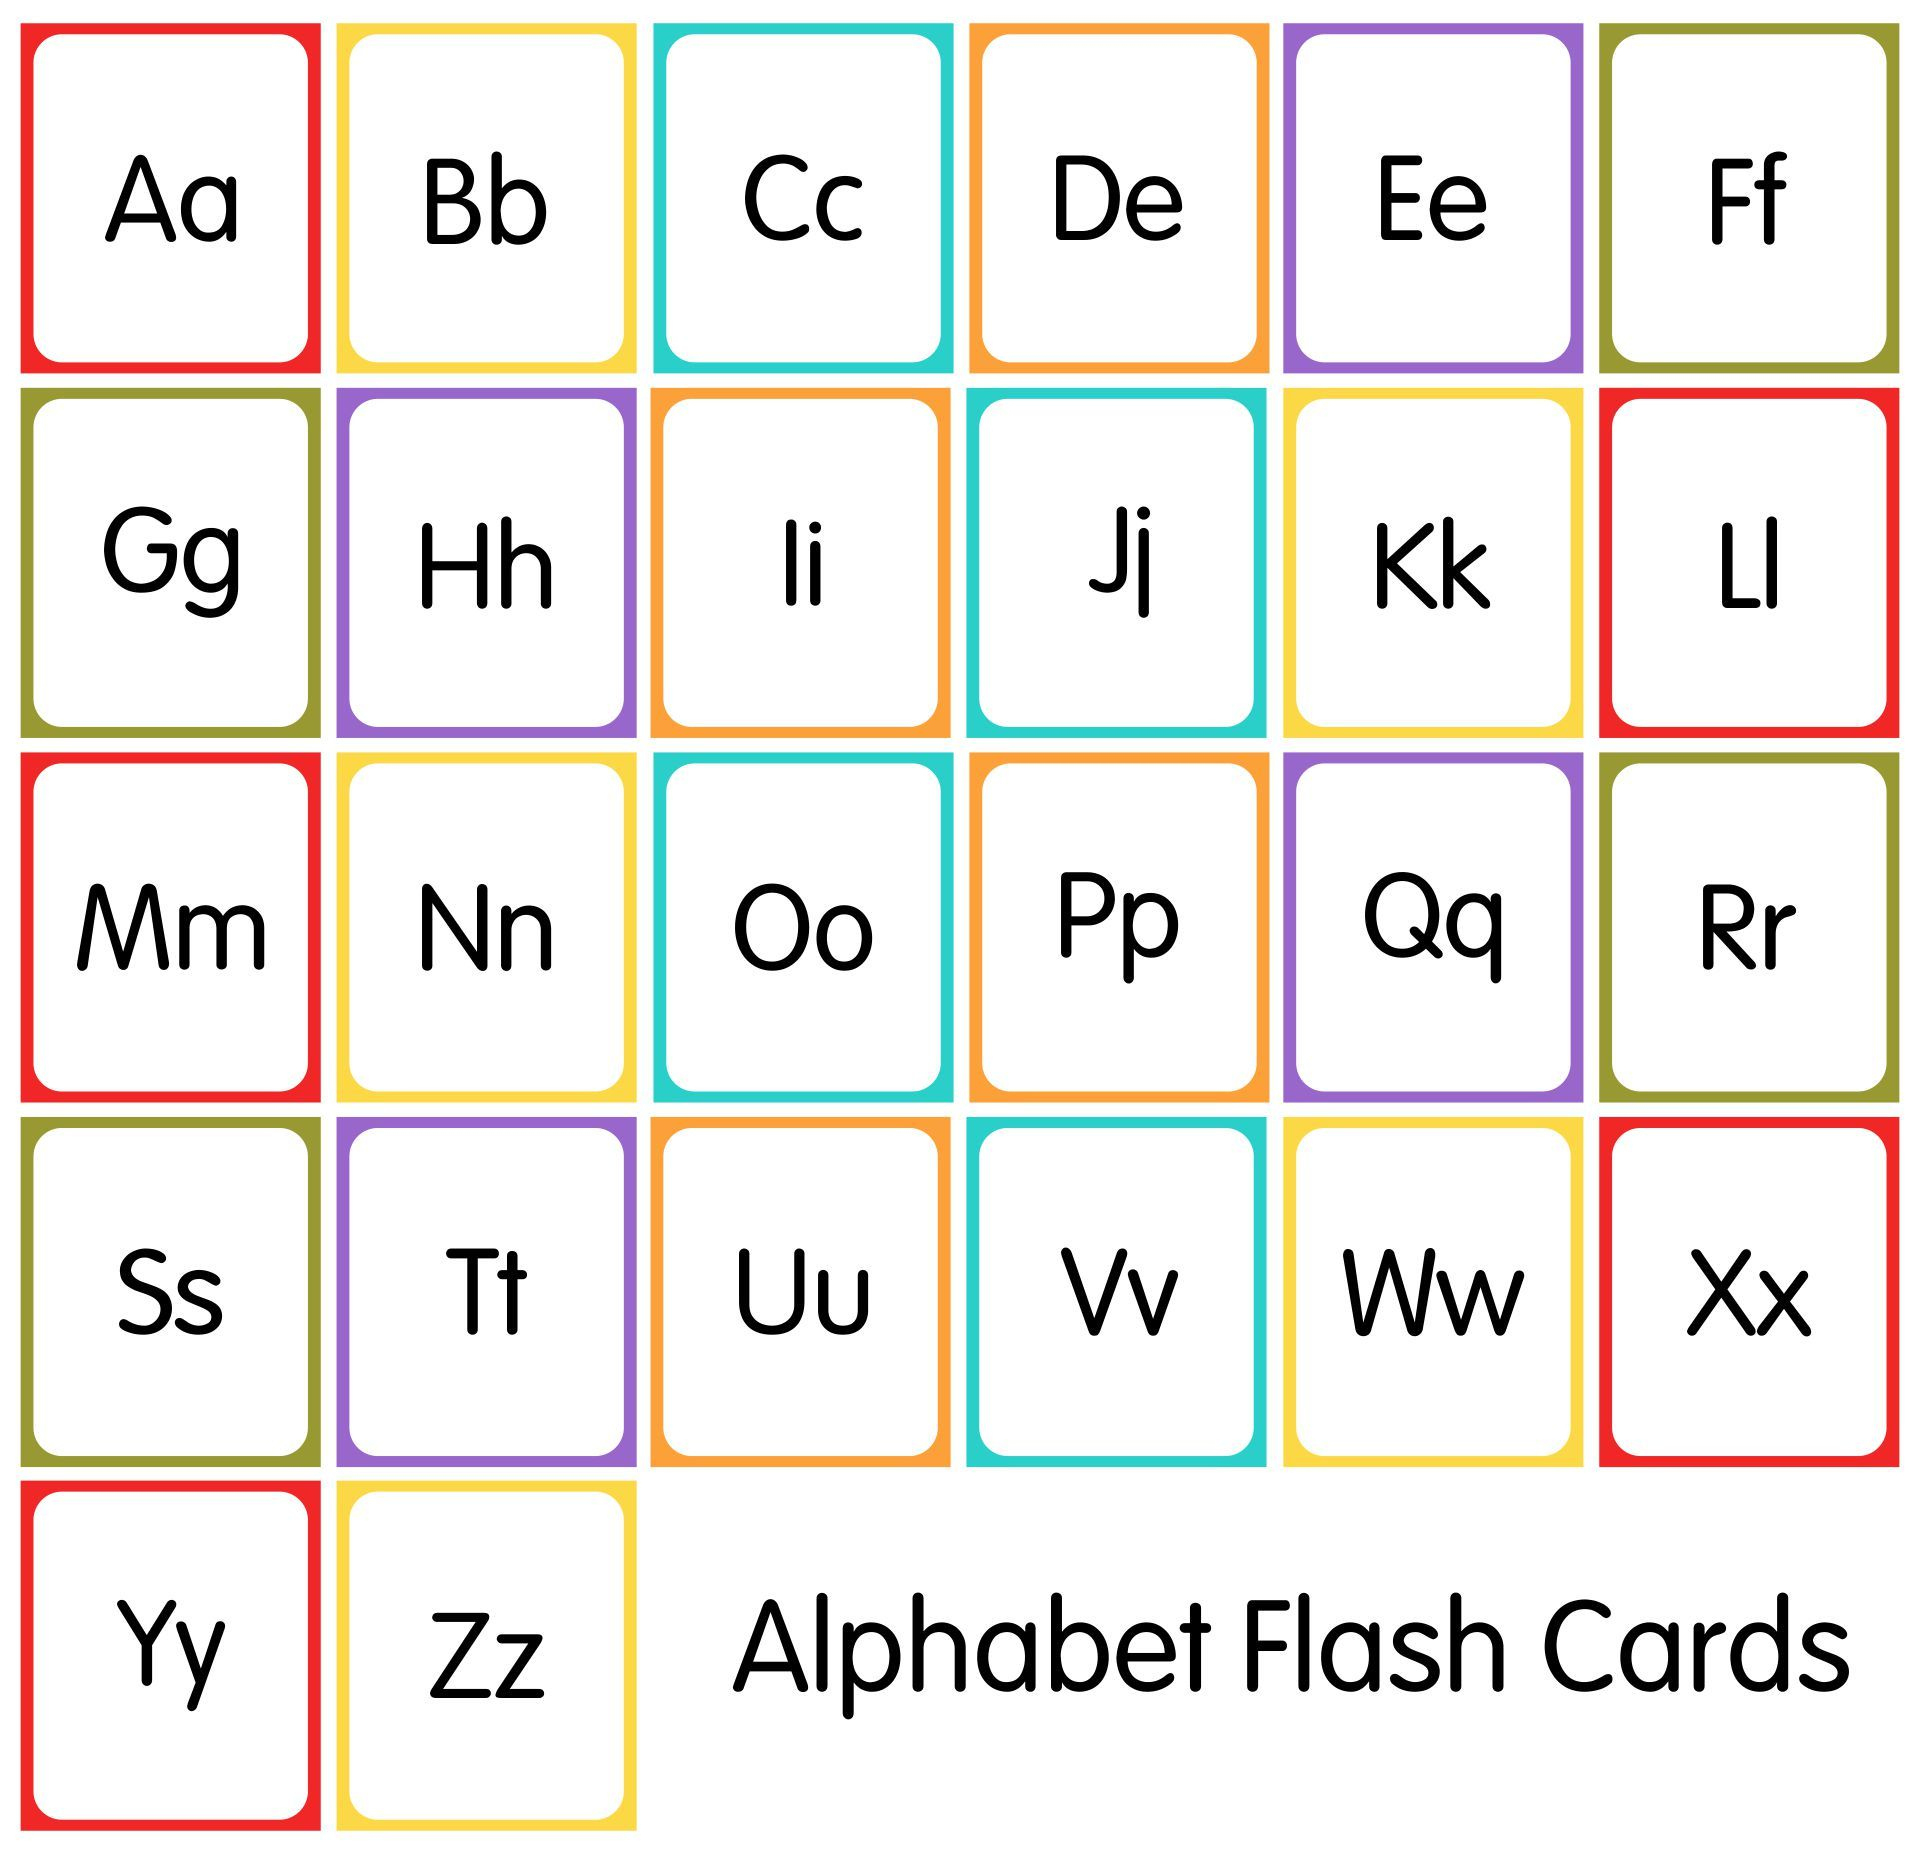 Alphabet Upper And Lower Case Letters Flash Cards | Alphabet within Free Printable Alphabet Letters Upper And Lower Case